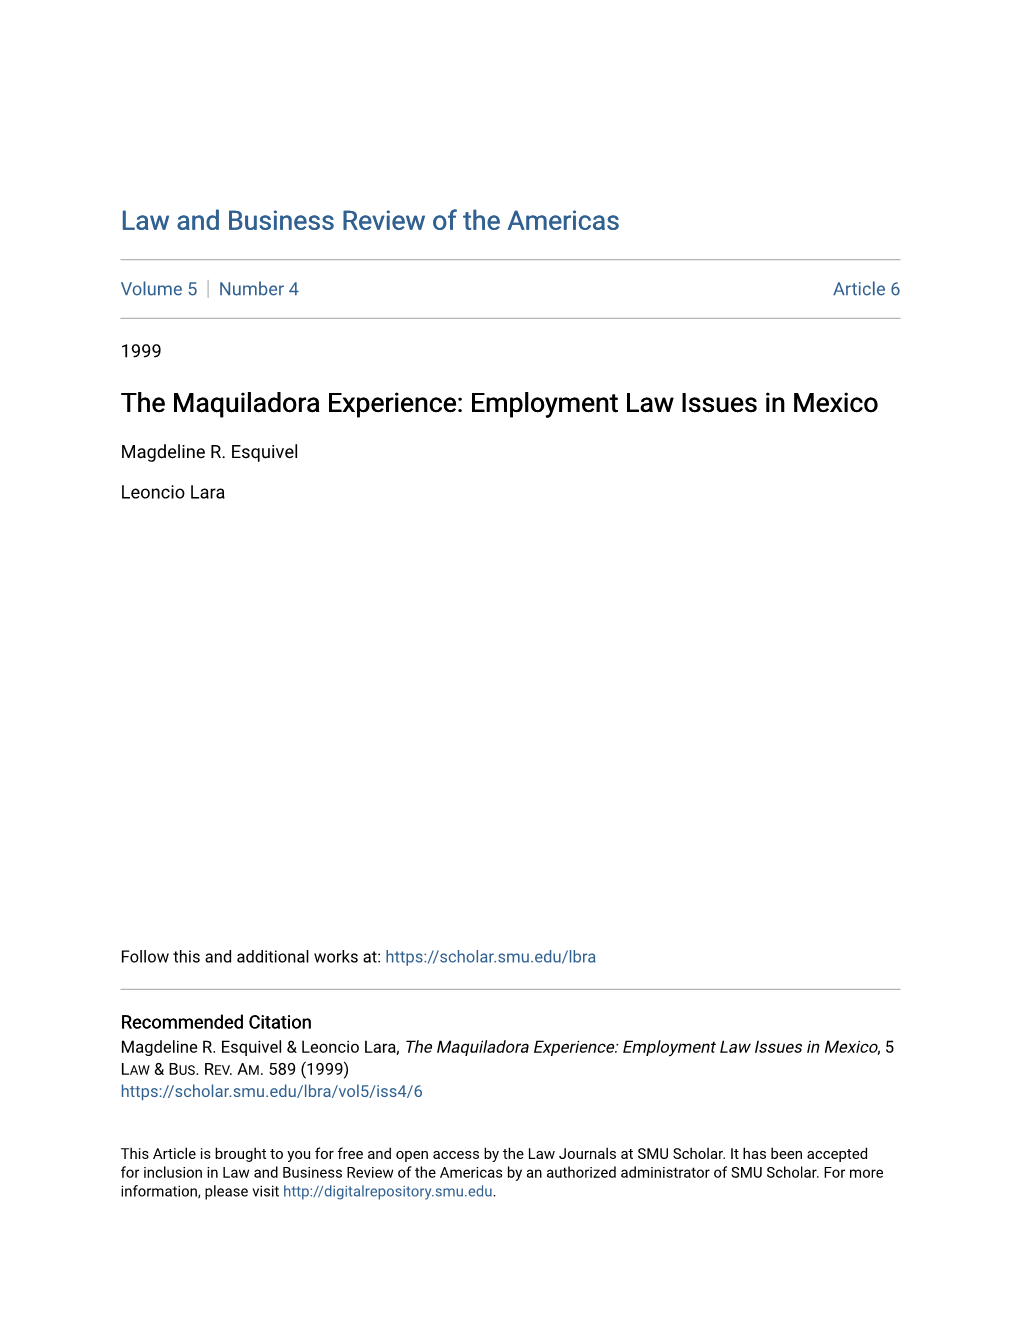 Employment Law Issues in Mexico